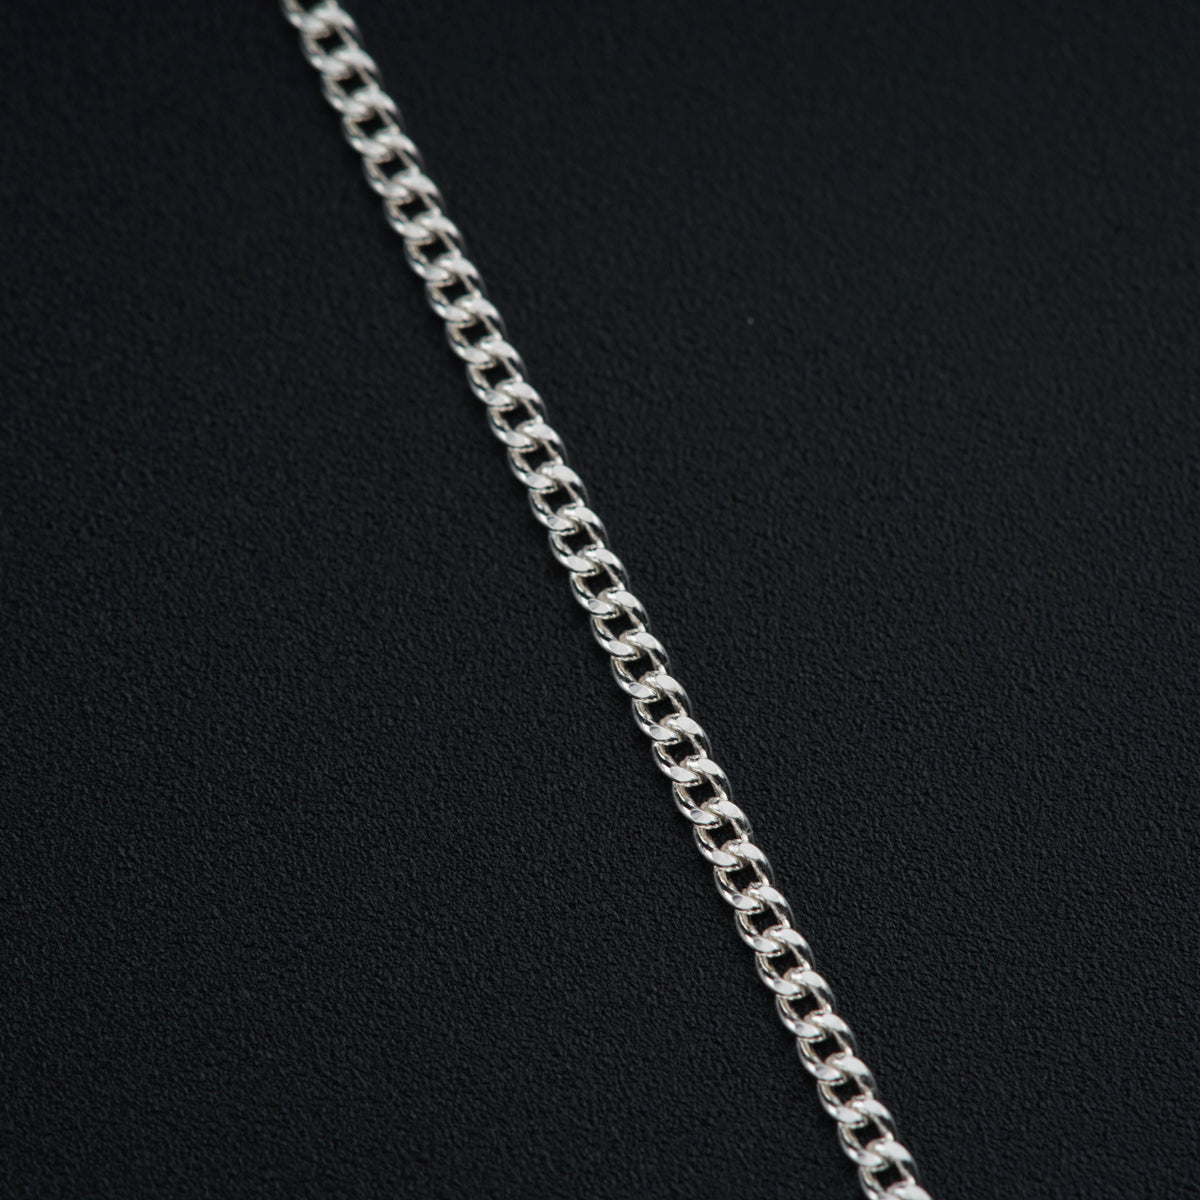 a close up of a chain on a black surface